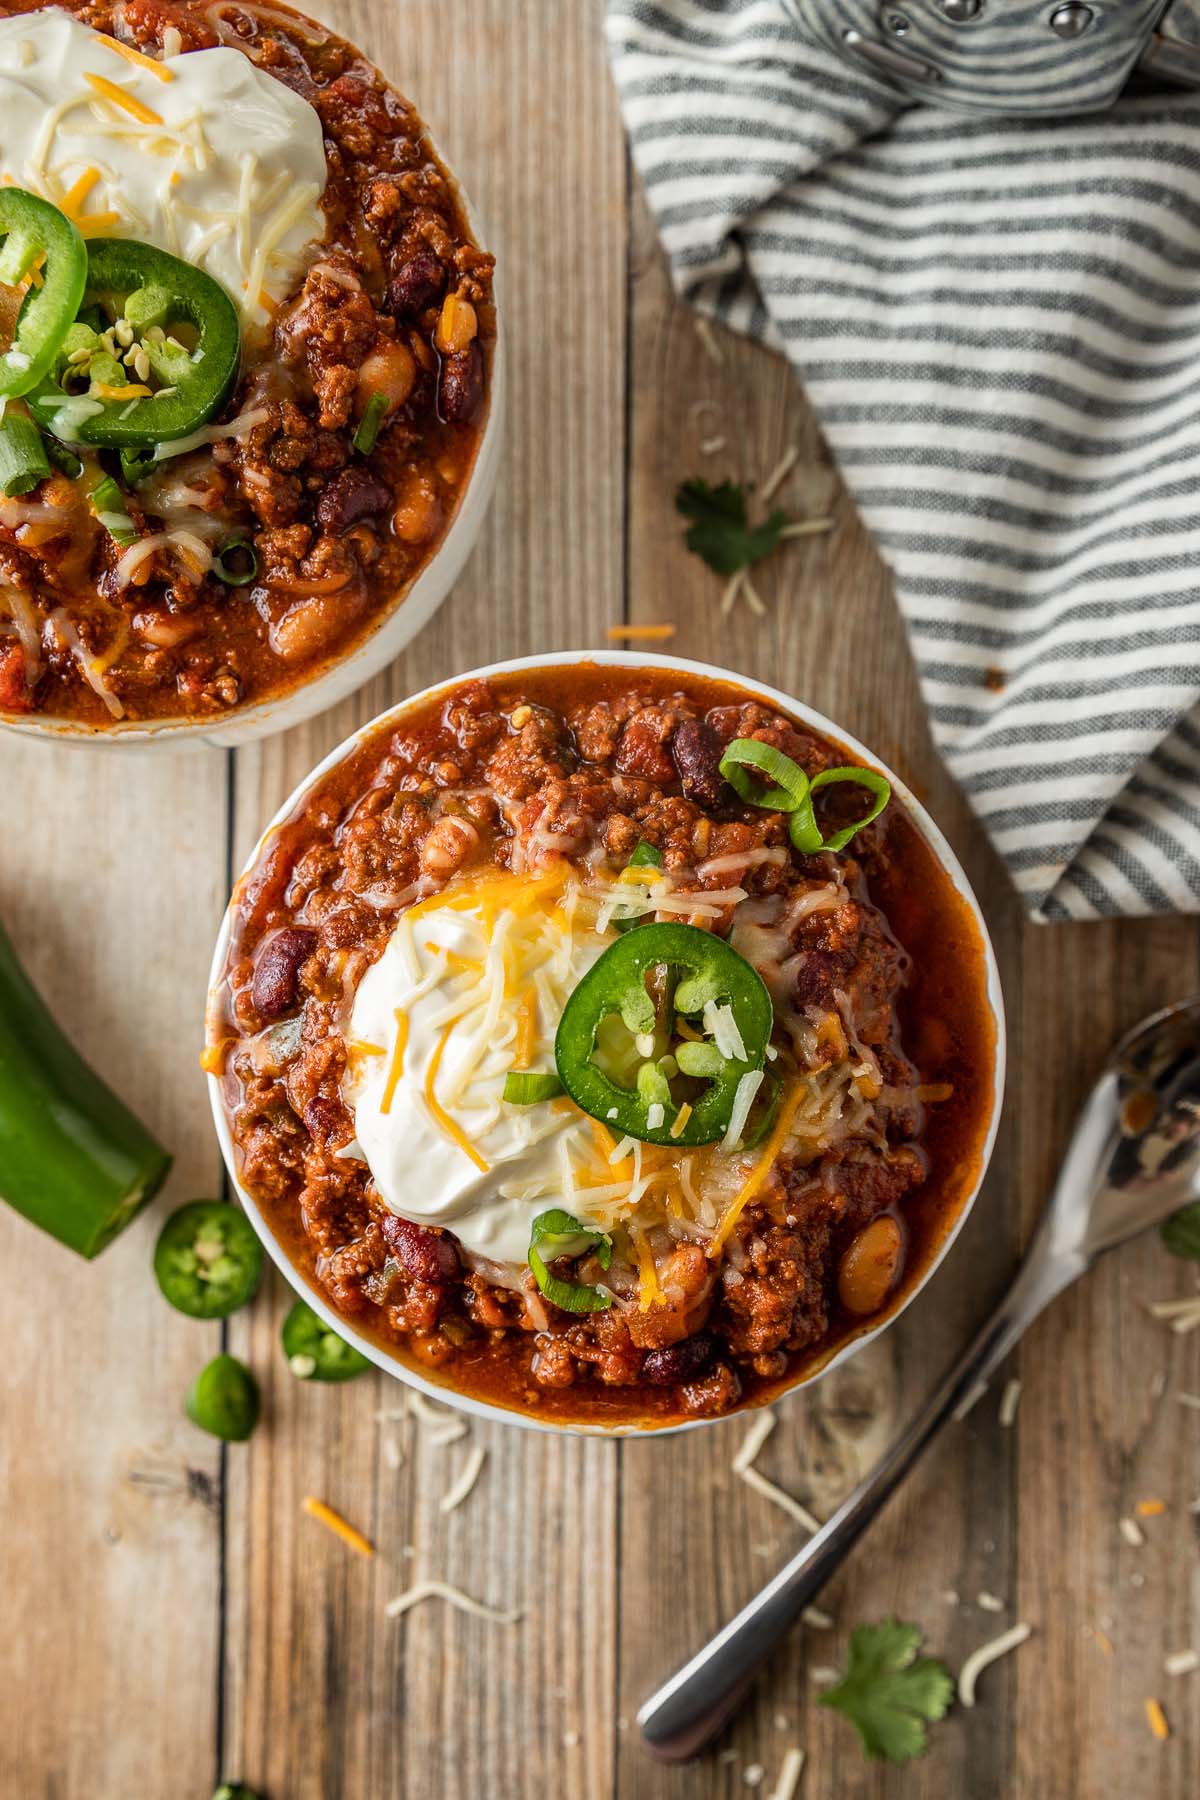 Crockpot Chili Recipe (Super Easy) - Cooked by Julie